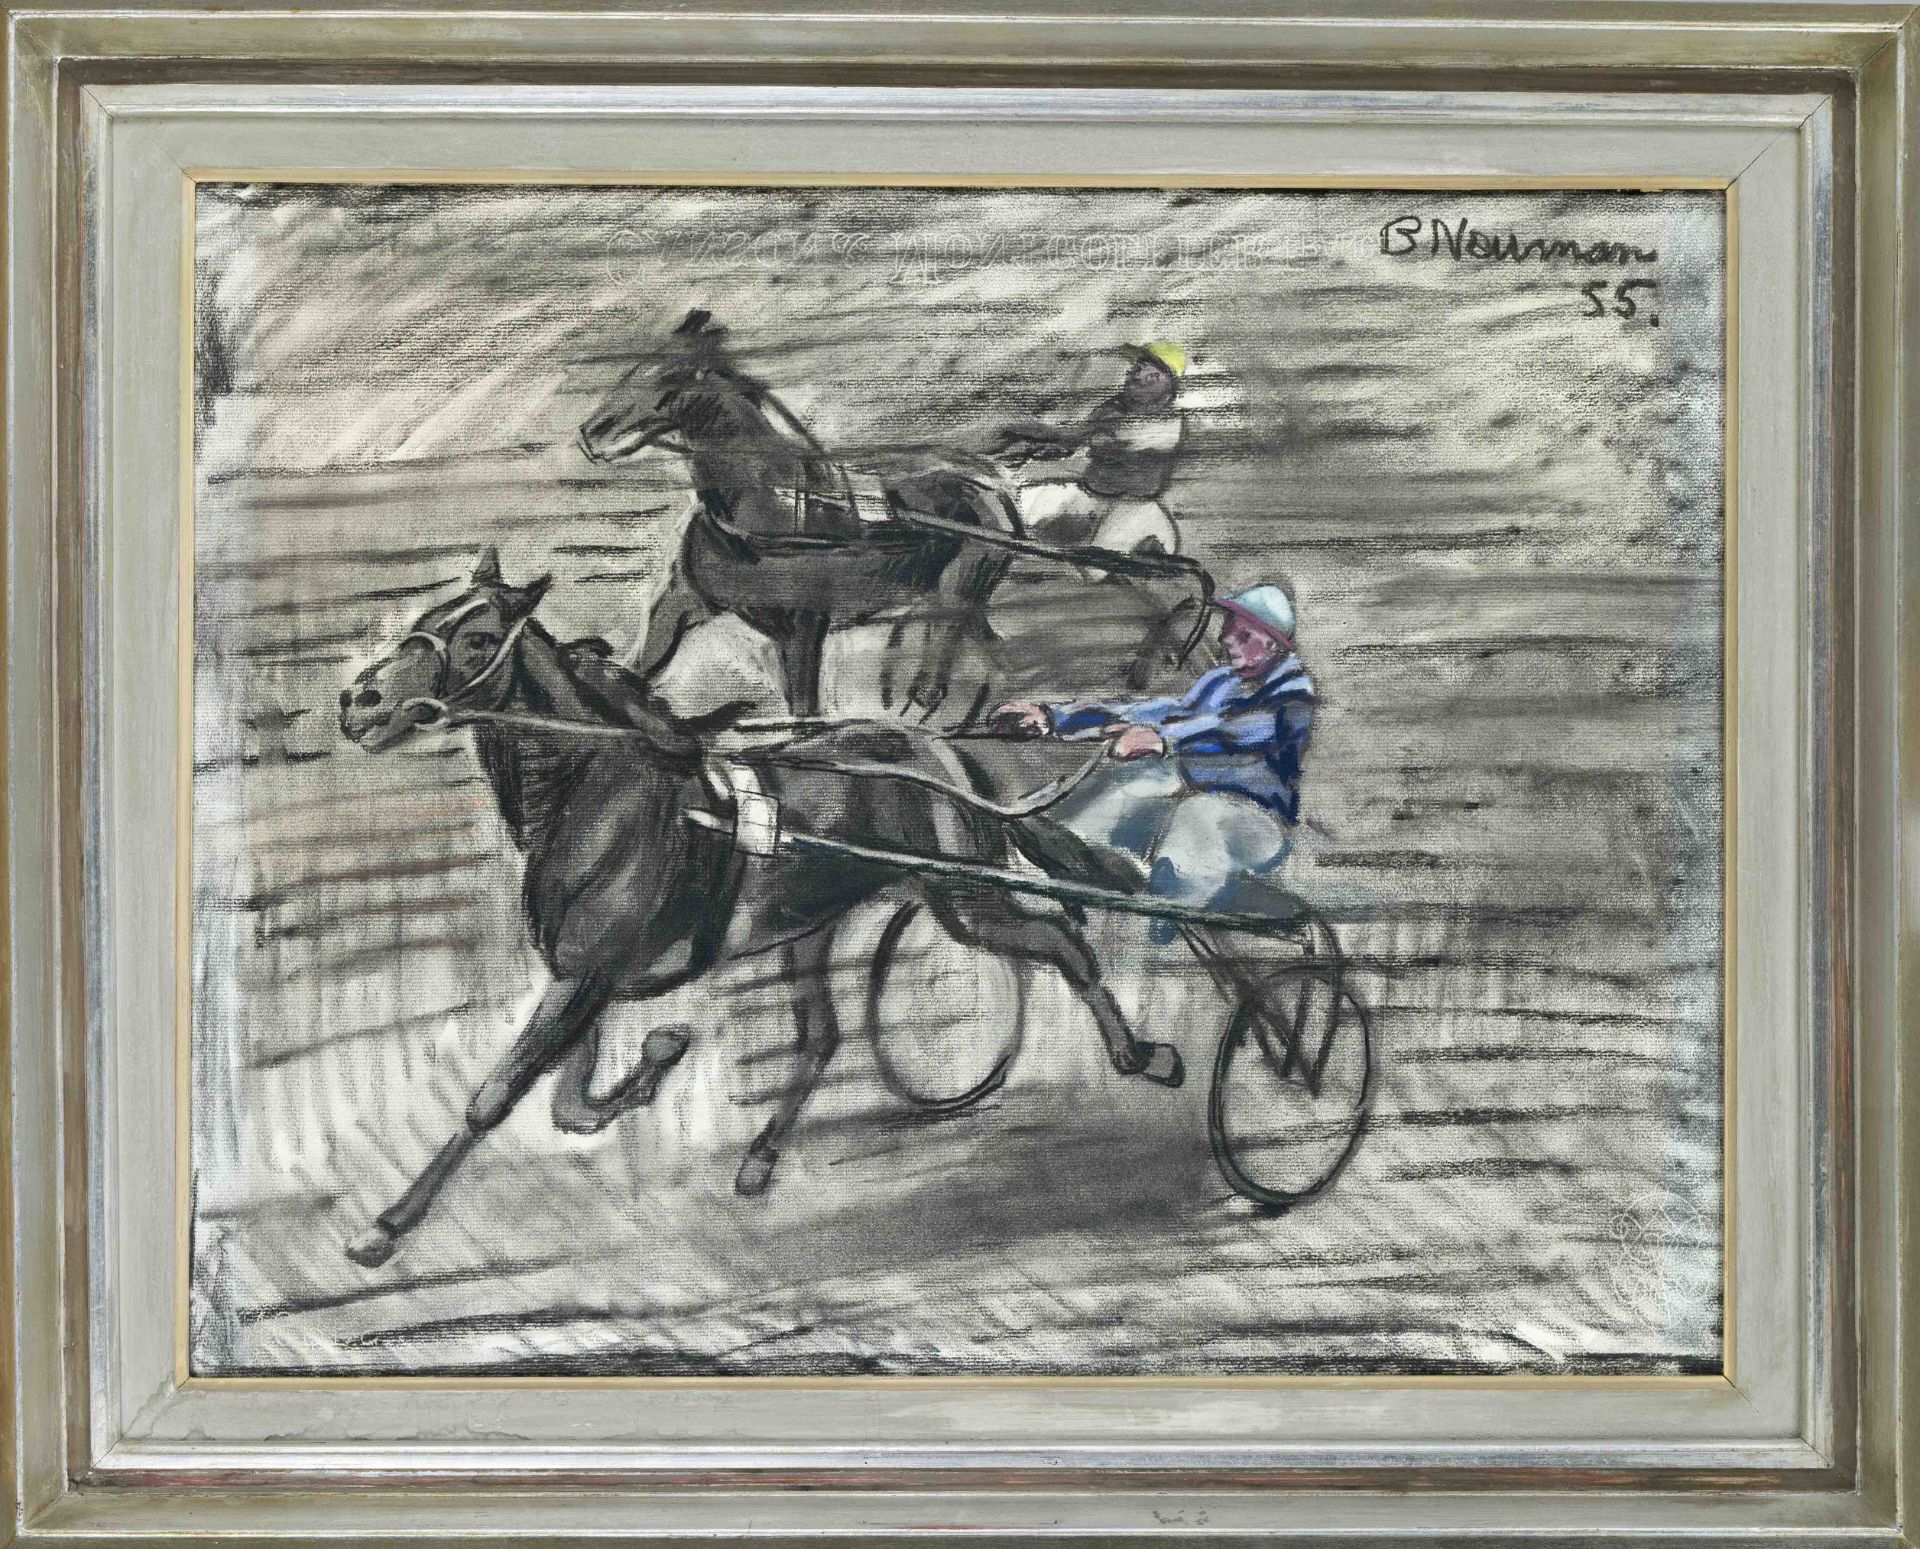 signed B. Nauman, mid-20th century, Trotting, color chalk on laid paper, signed and dated (19)55